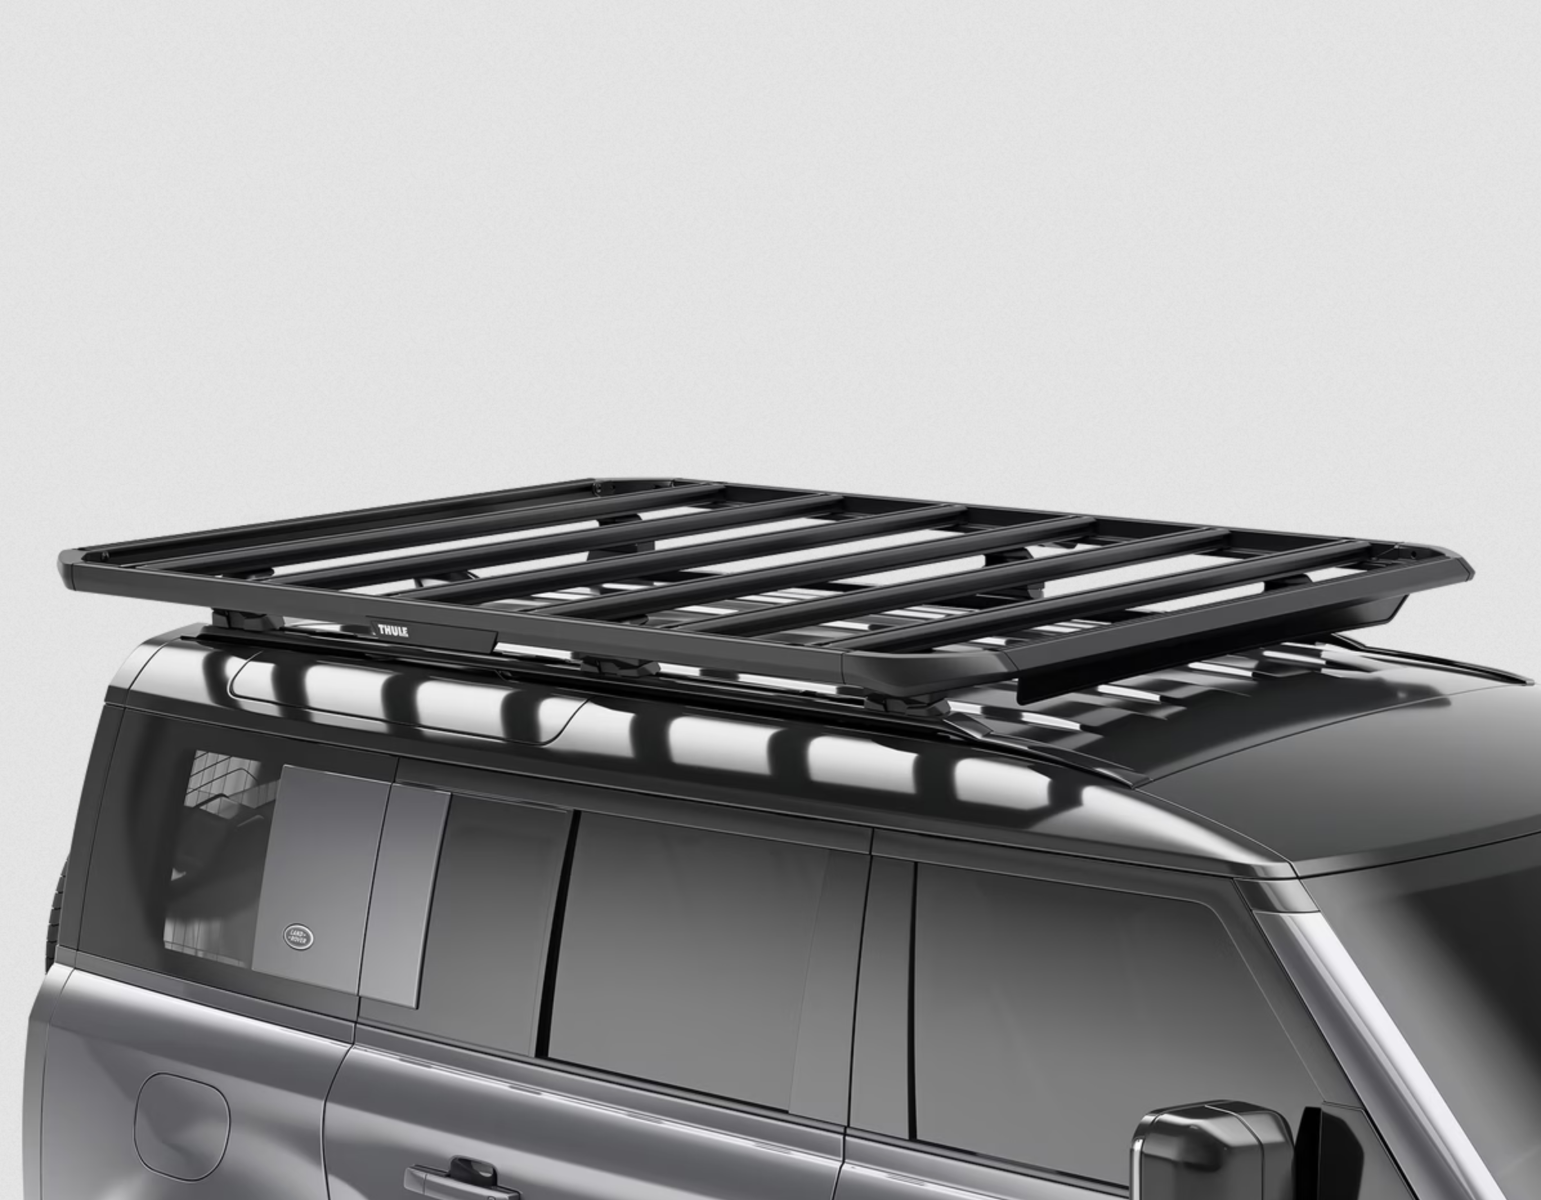 Thule Caprock Platform (1900 x 1500mm) for Land Rover Discovery Series 3 & 4 5dr SUV with Factory Fitted Track (2005 to 2017) - Factory Point Mount